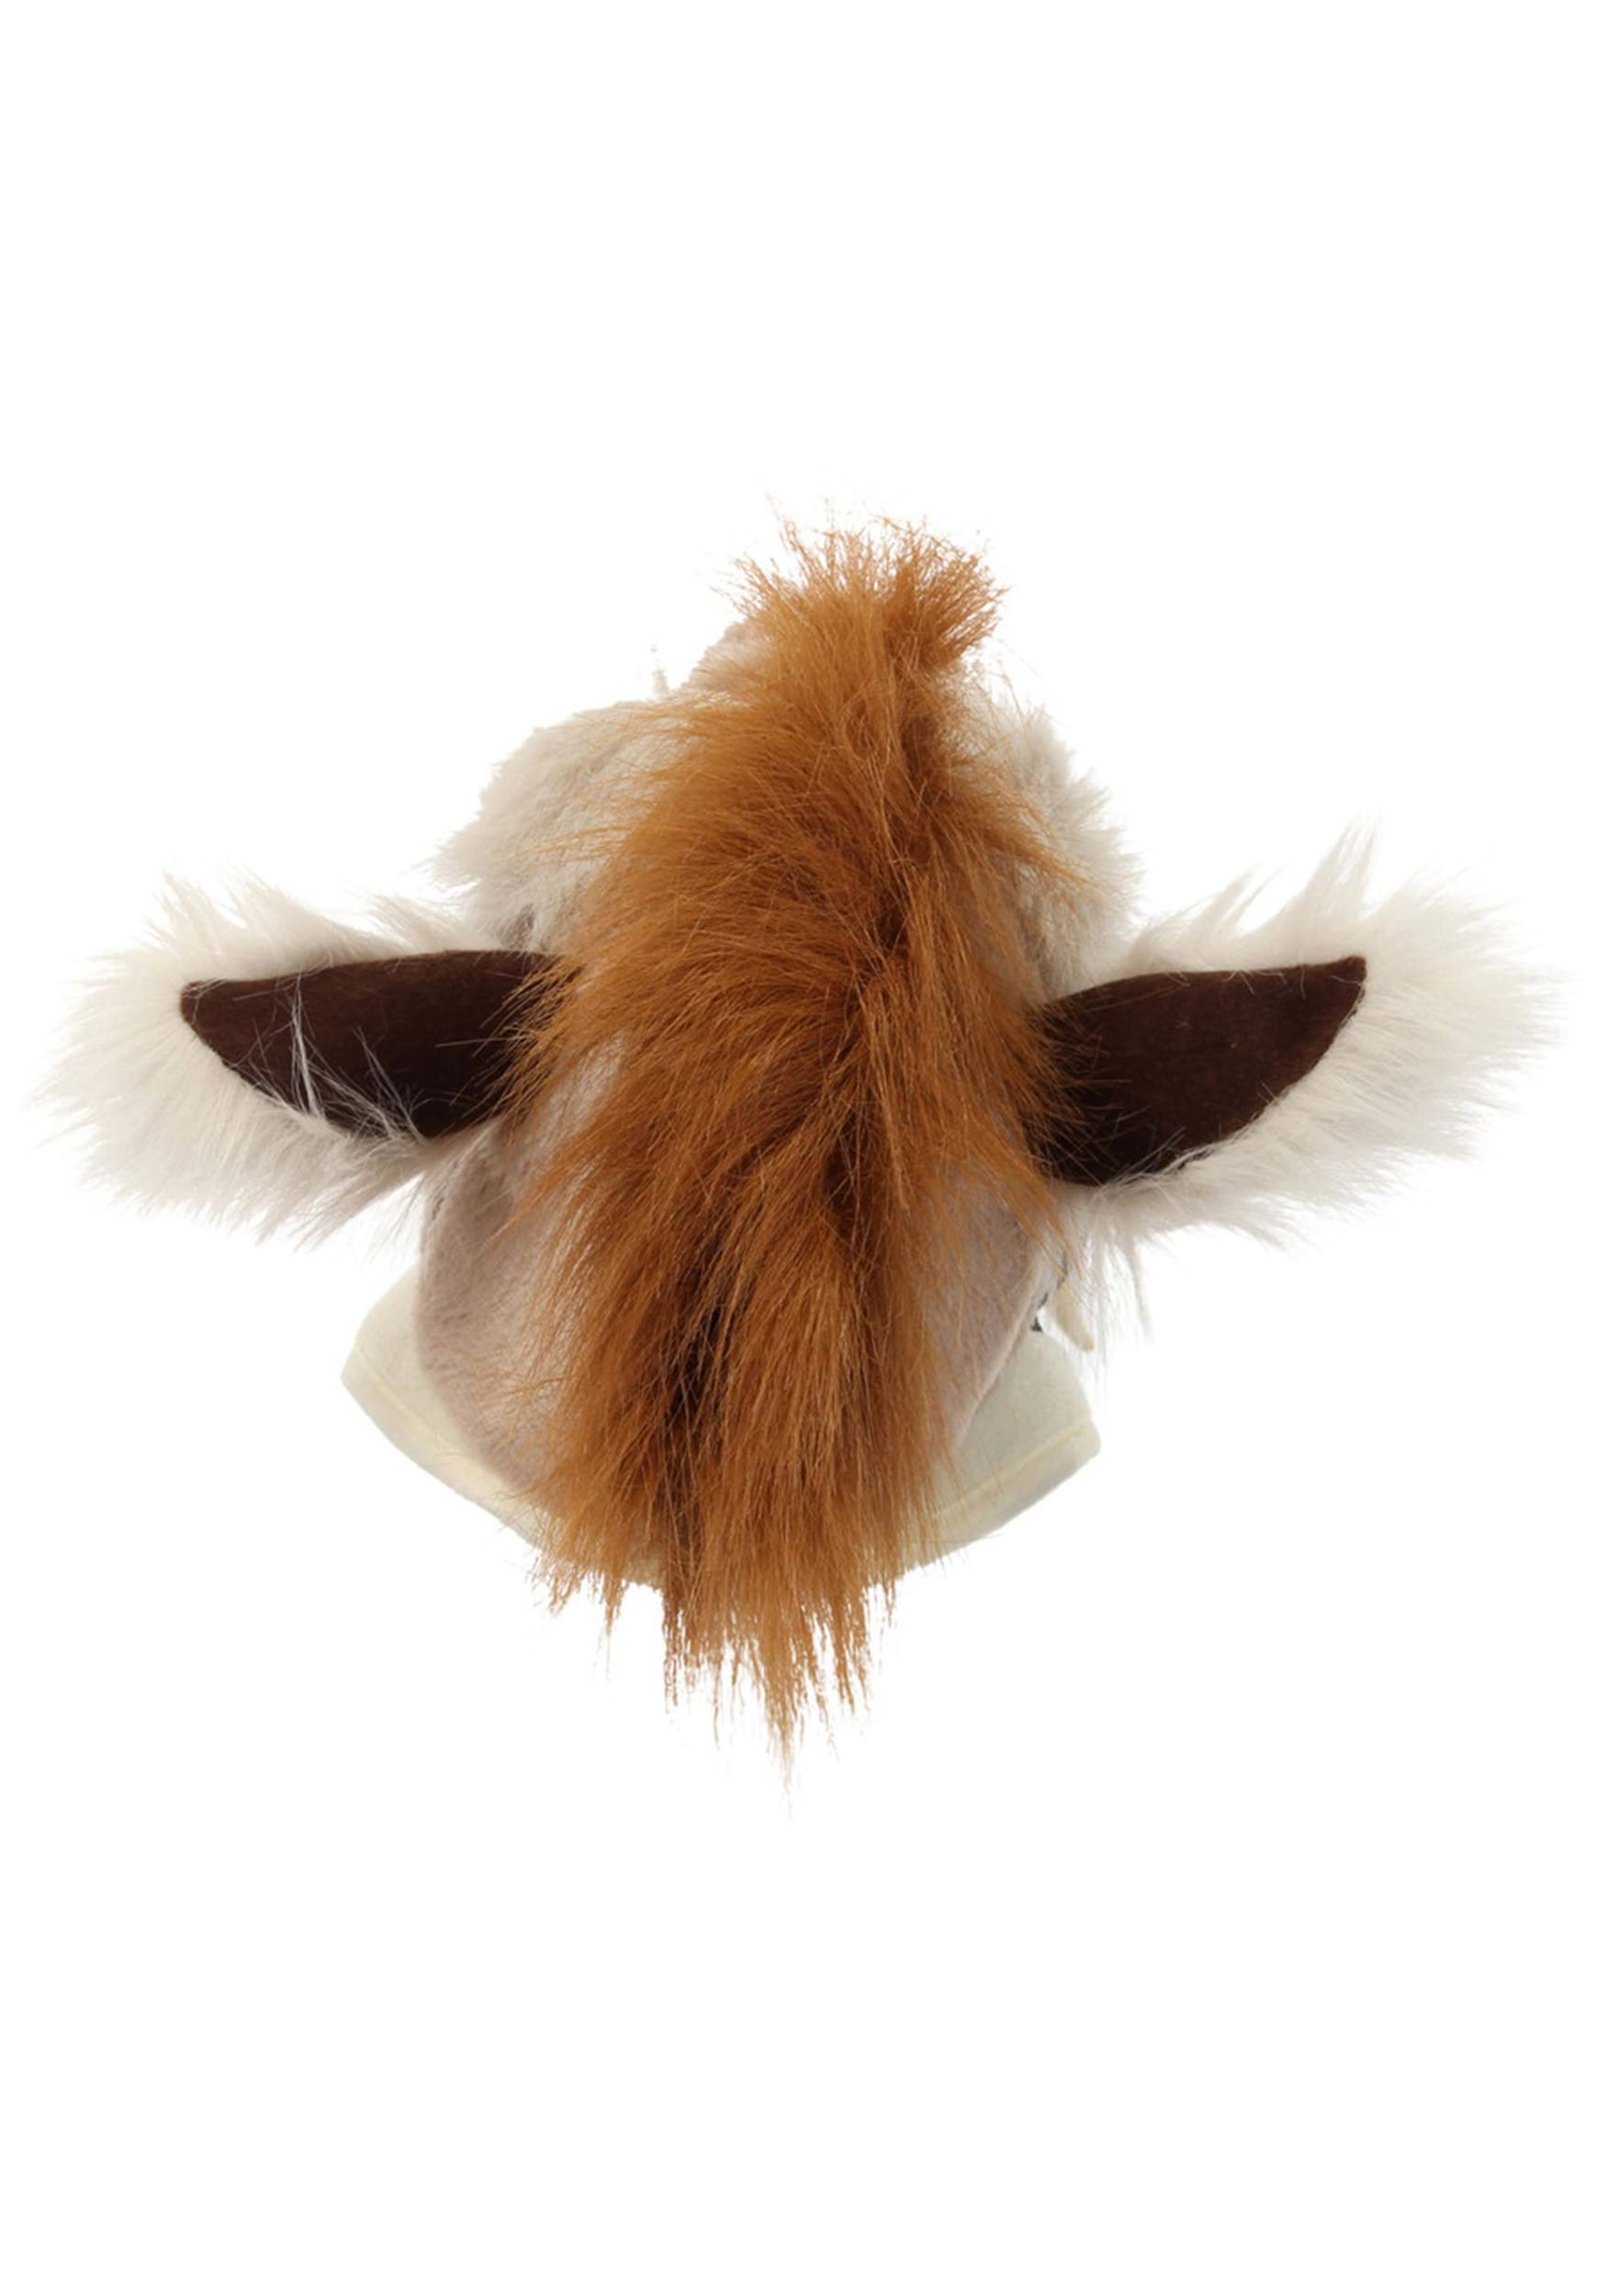 Jawesome Fancy Dress Costume Hat Sabertooth